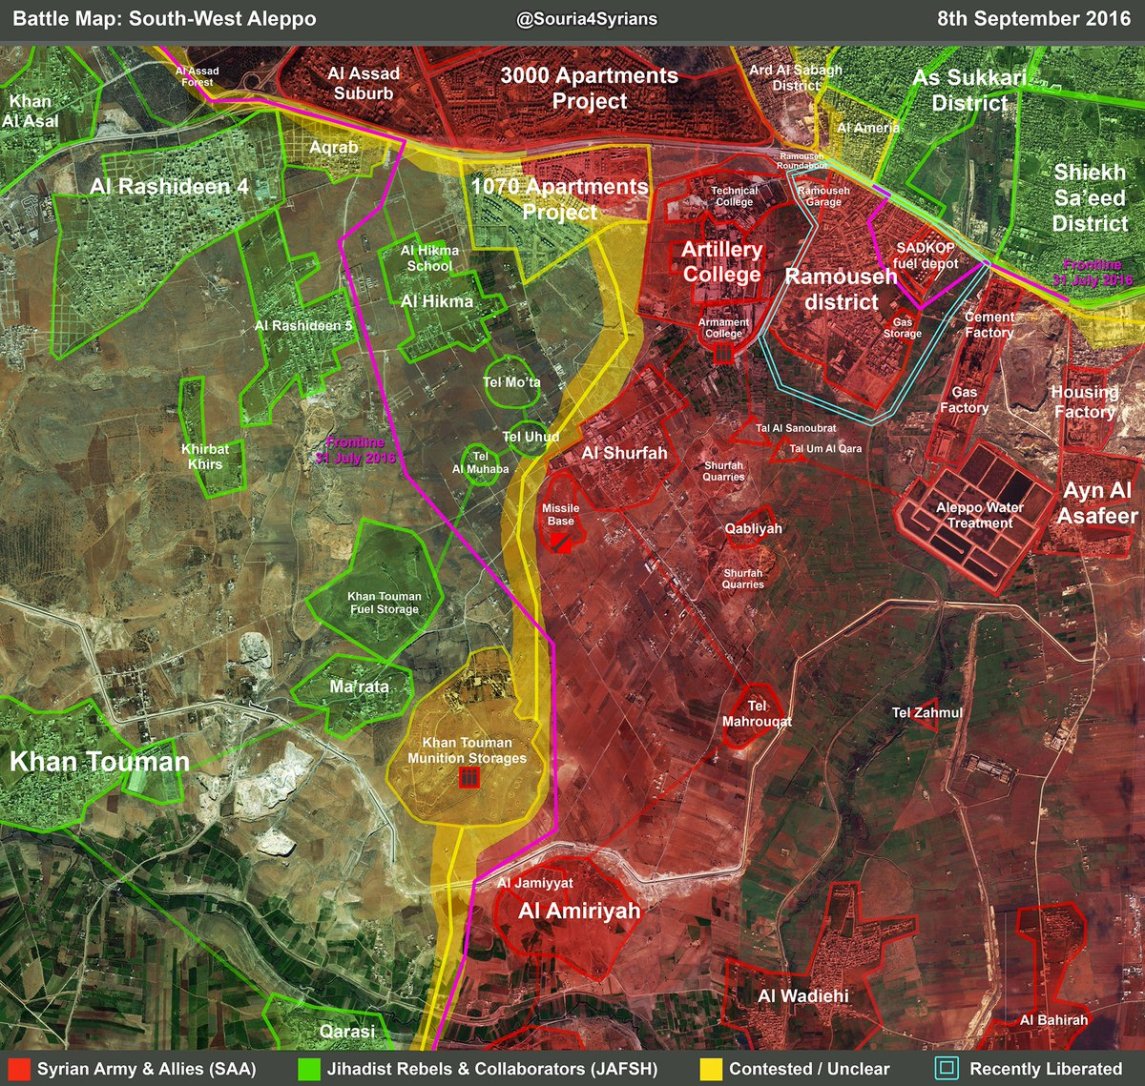 Map shows the re-encirclement of east Aleppo with the SAA seizure of the entire Ramouseh district. , the Ramouseh-Khan Touman road was never really functional as a supply line as it fell within the range of the Syrian artillery. Now it is physically cut.